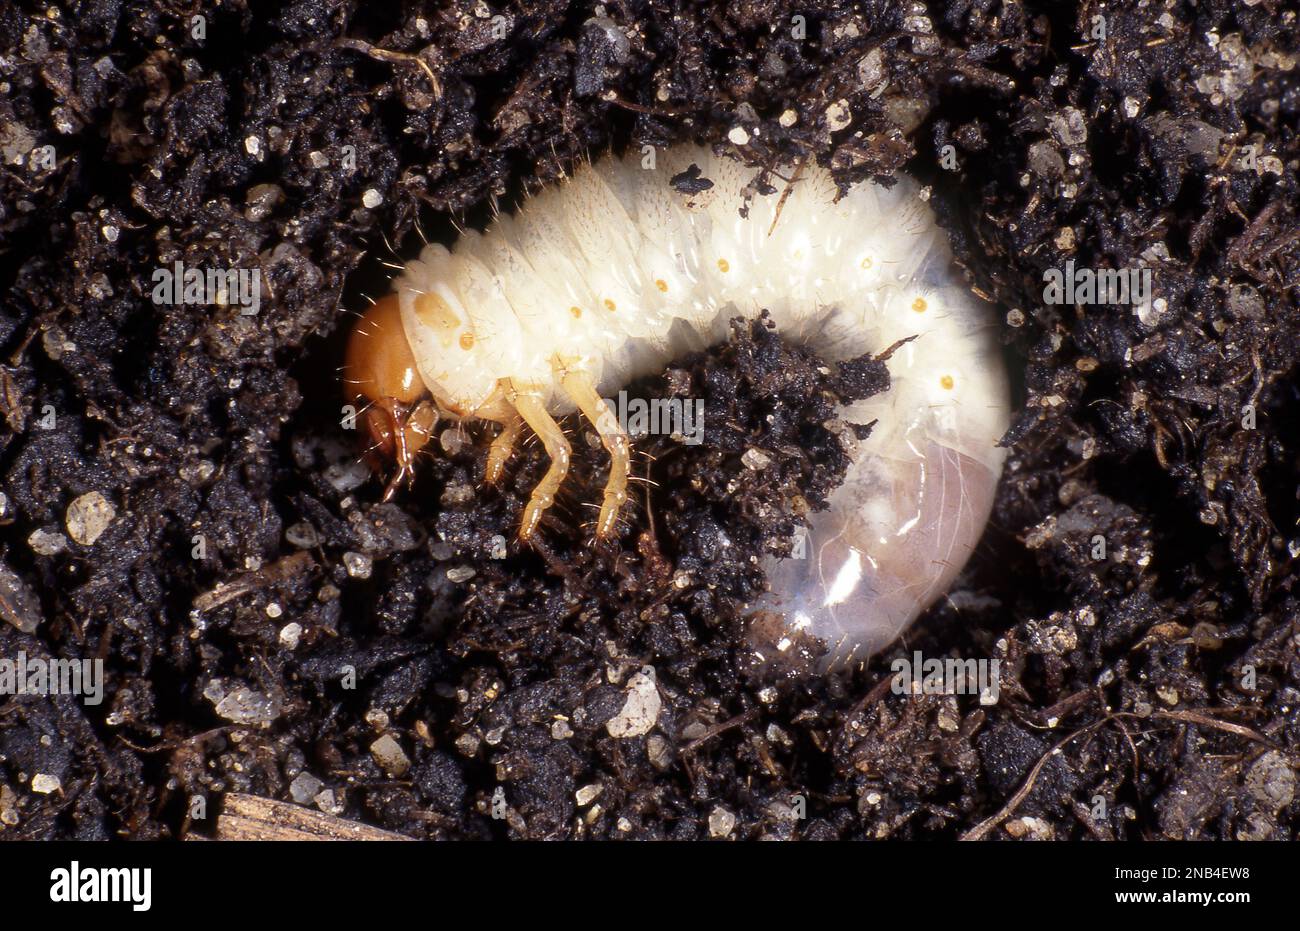 CURL GRUB, THE LARVAE OF THE AFRICAN BEETLE. Stock Photo